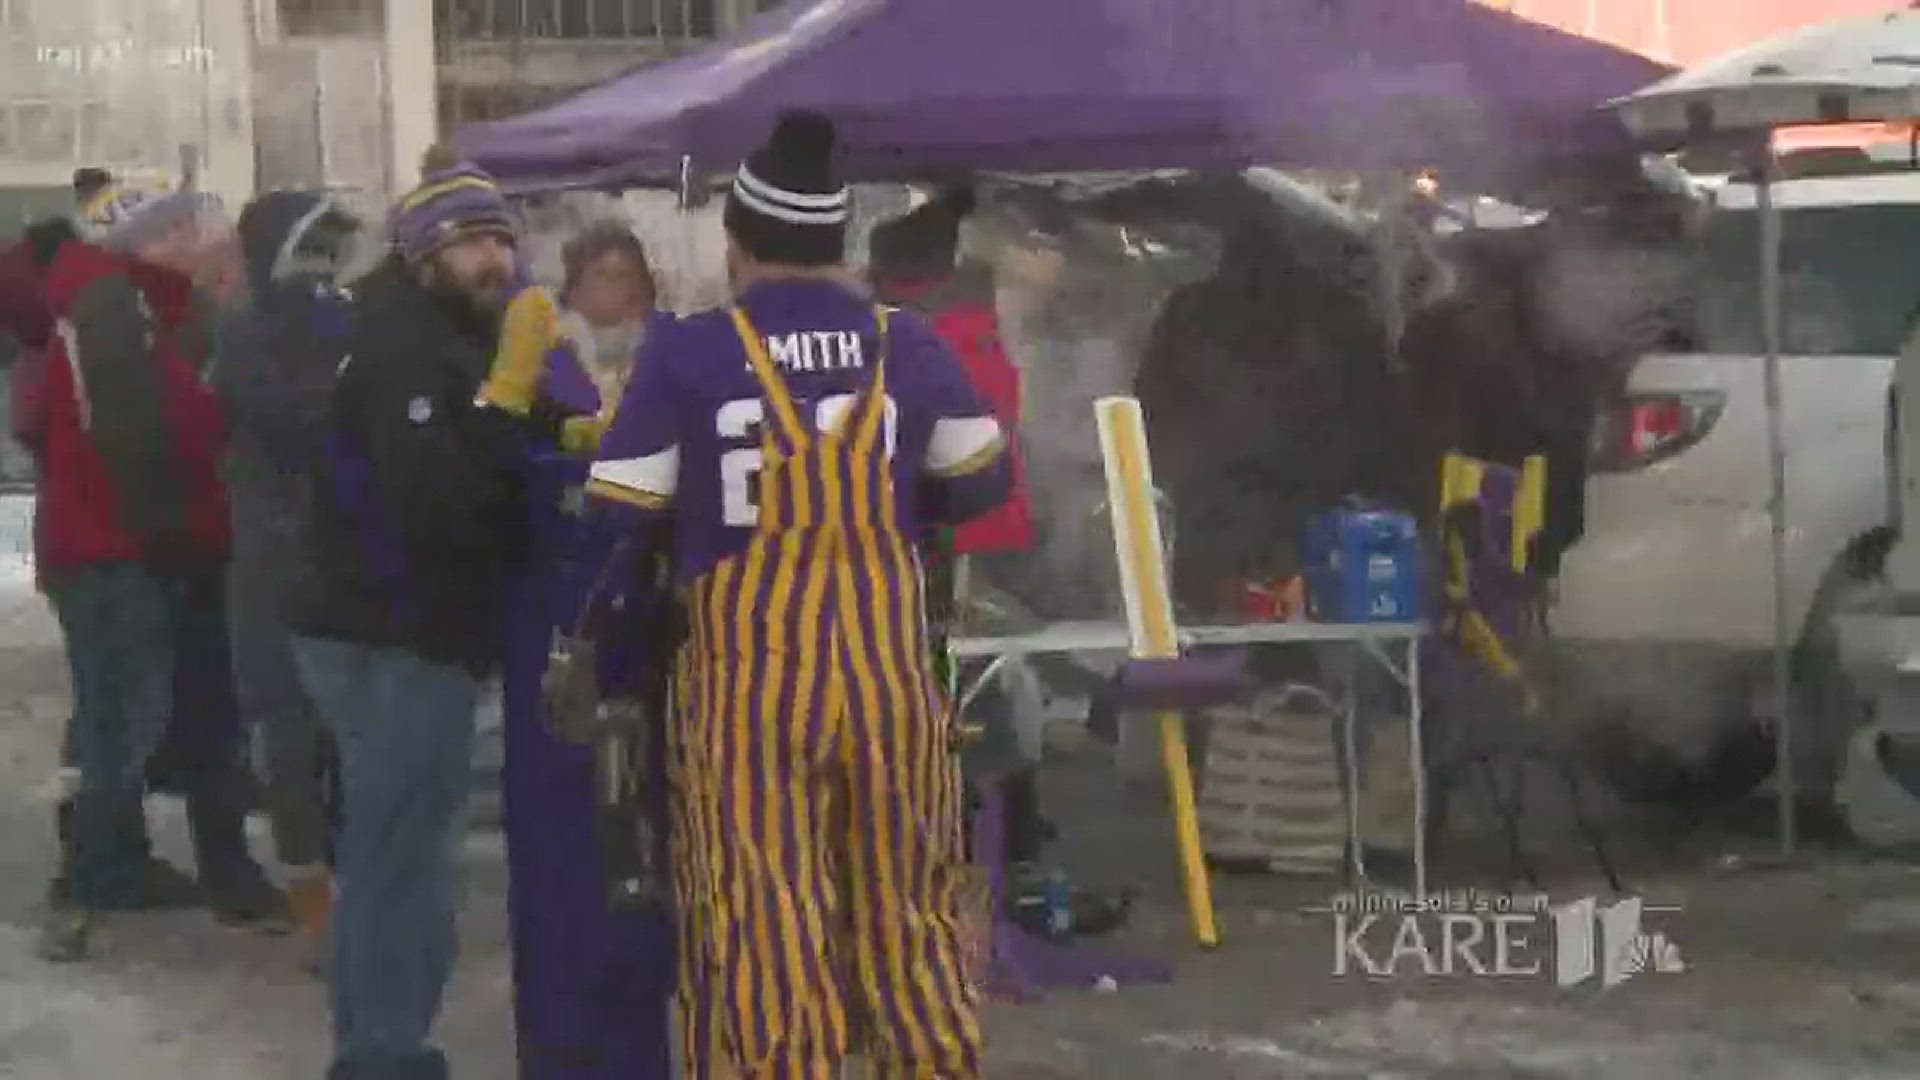 Fewer tailgating spots available for Sunday's game